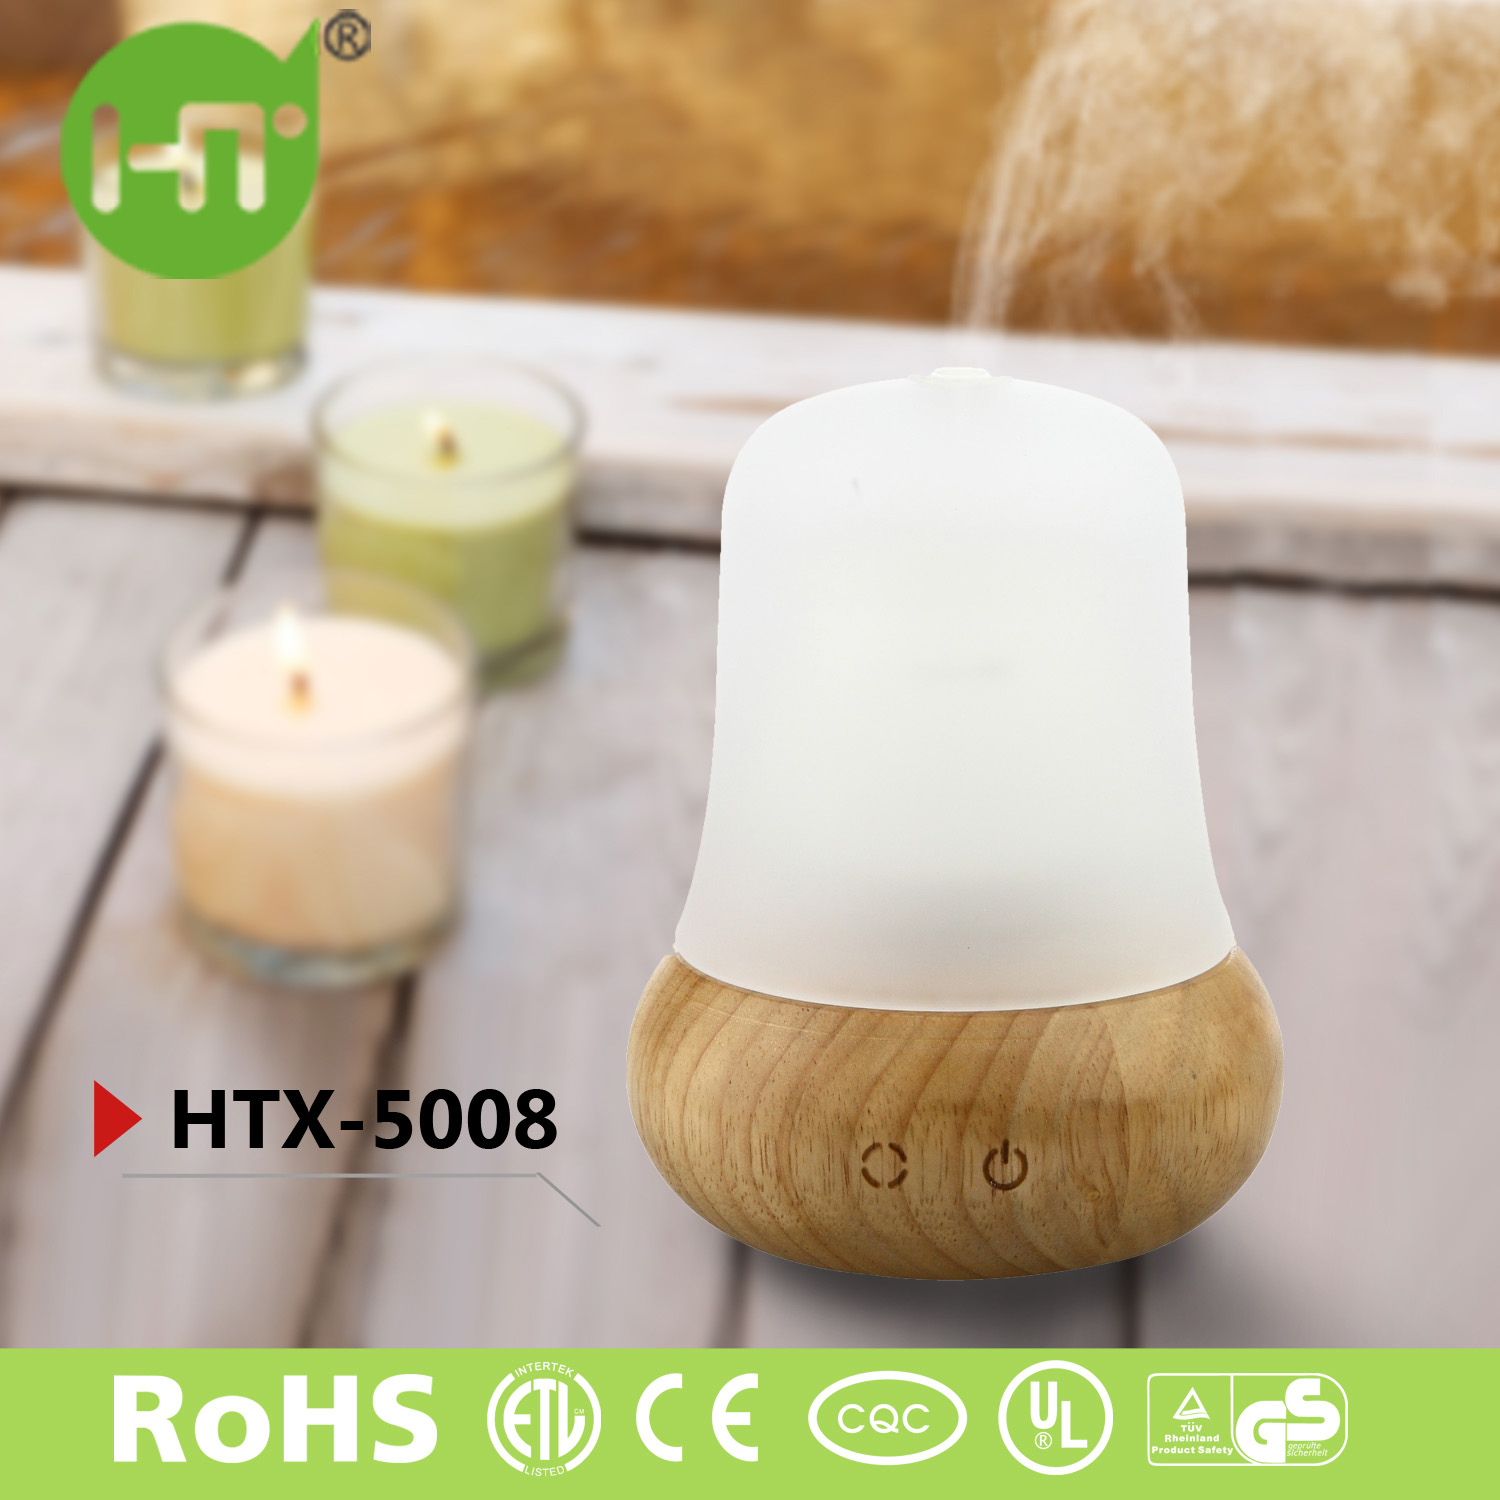 HTX-5008 Wooden Portable Color Changing Cool Mist Humidifier Essential Oil Electric Aroma Diffuser